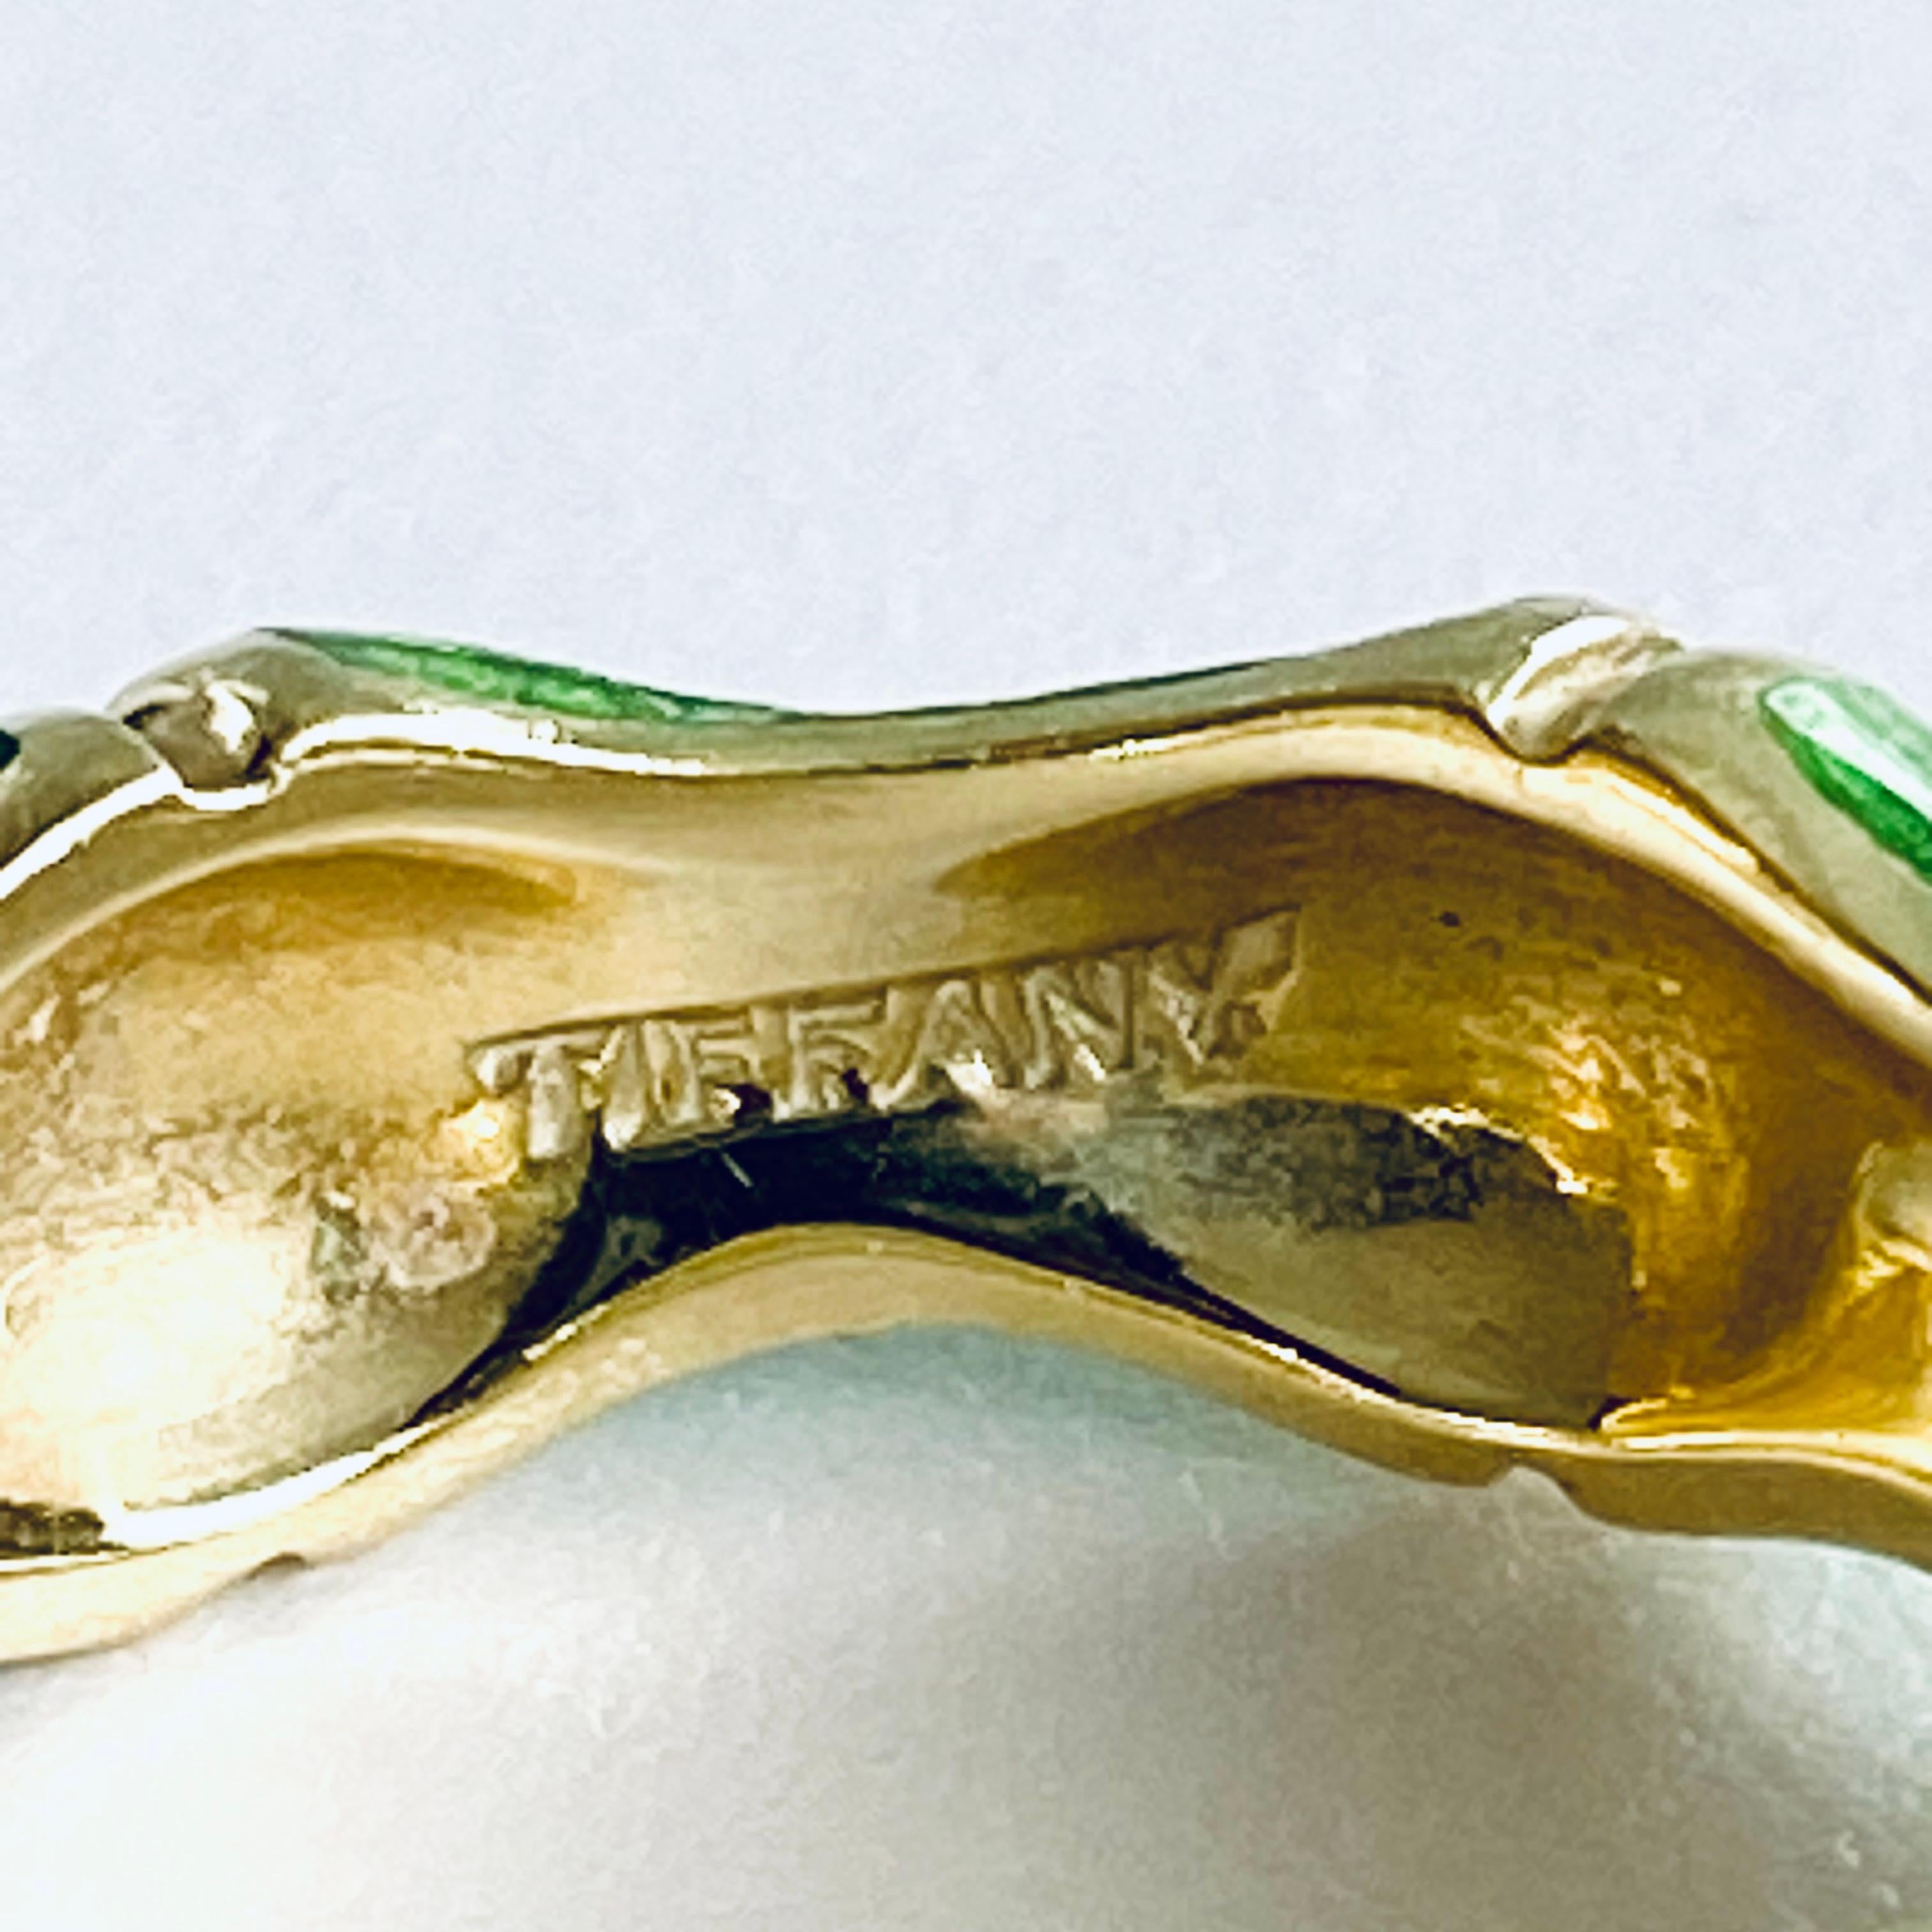 Tiffany and Co Eighteen Karat Gold and Green Enamel Bamboo Ring Size 5.25  4